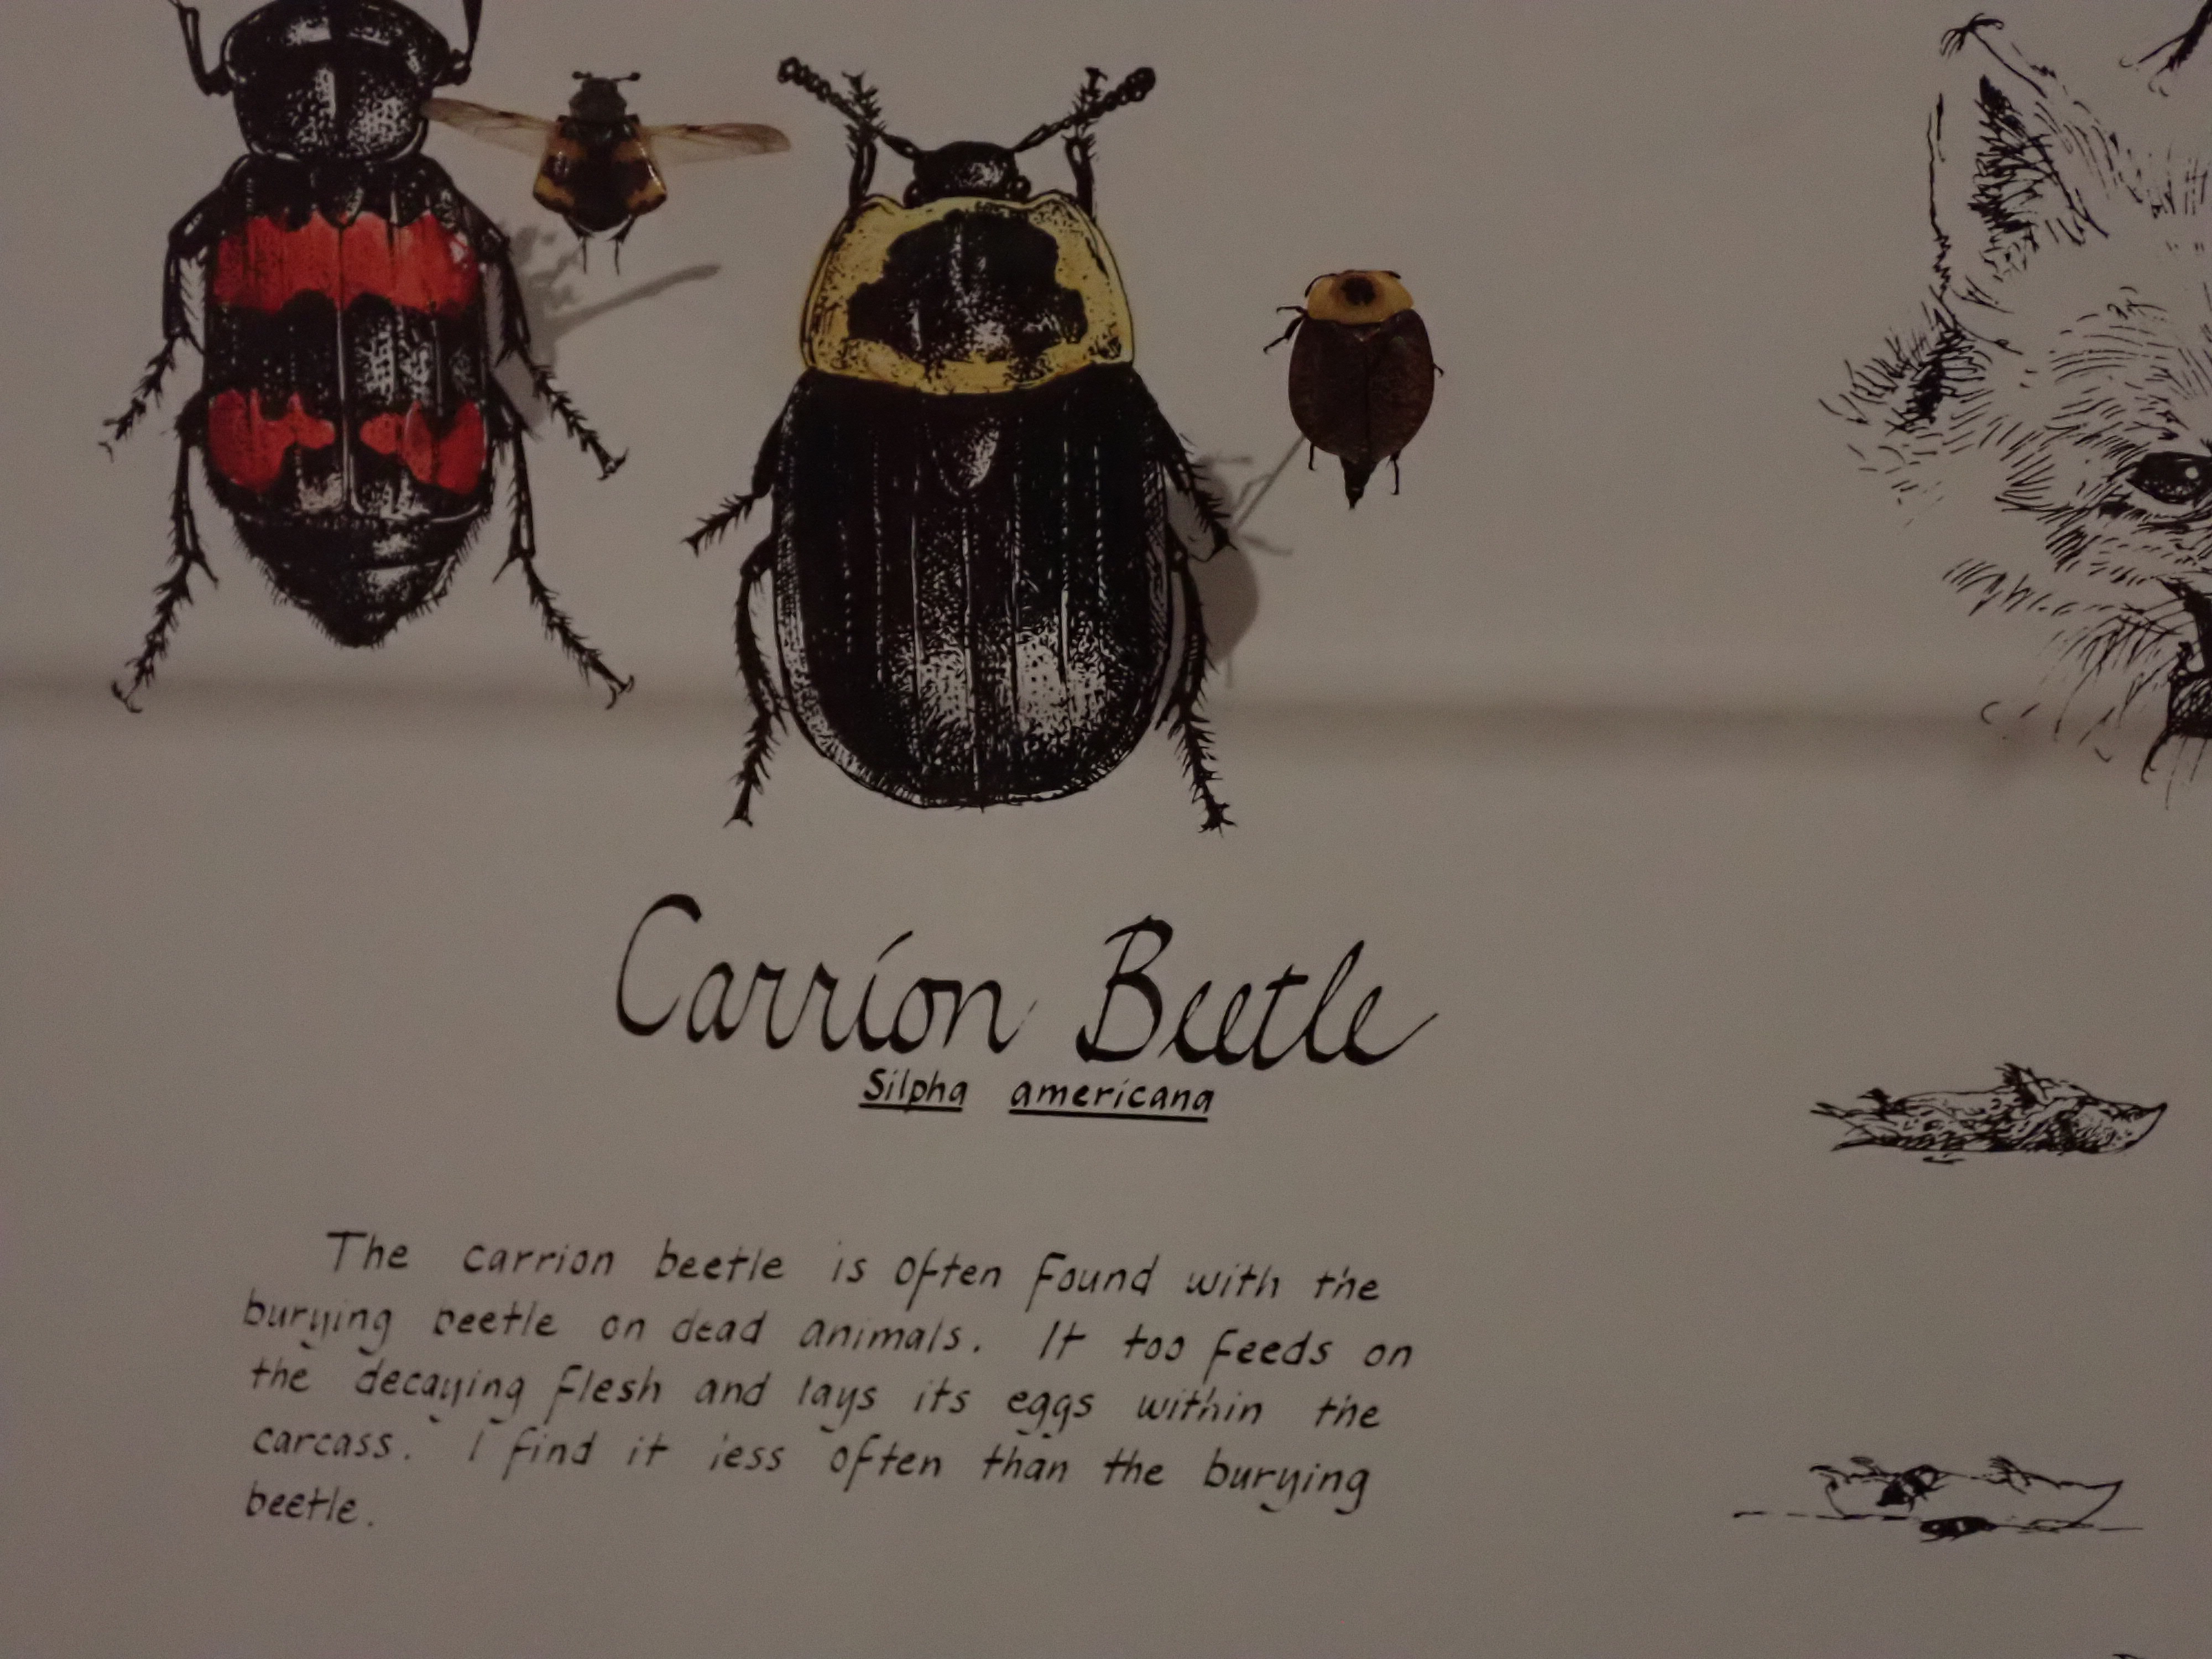 a drawing of a carrion beetle next to a burying beetle, done in the style of a 'field sketch', with pinned specimens of each next to the drawings. Words beneath read 'The carrion beetle is often found with the burying beetle on dead animals. It too feeds on the decaying flesh and lays its eggs within the carcass. I find it less often than the burying beetle.